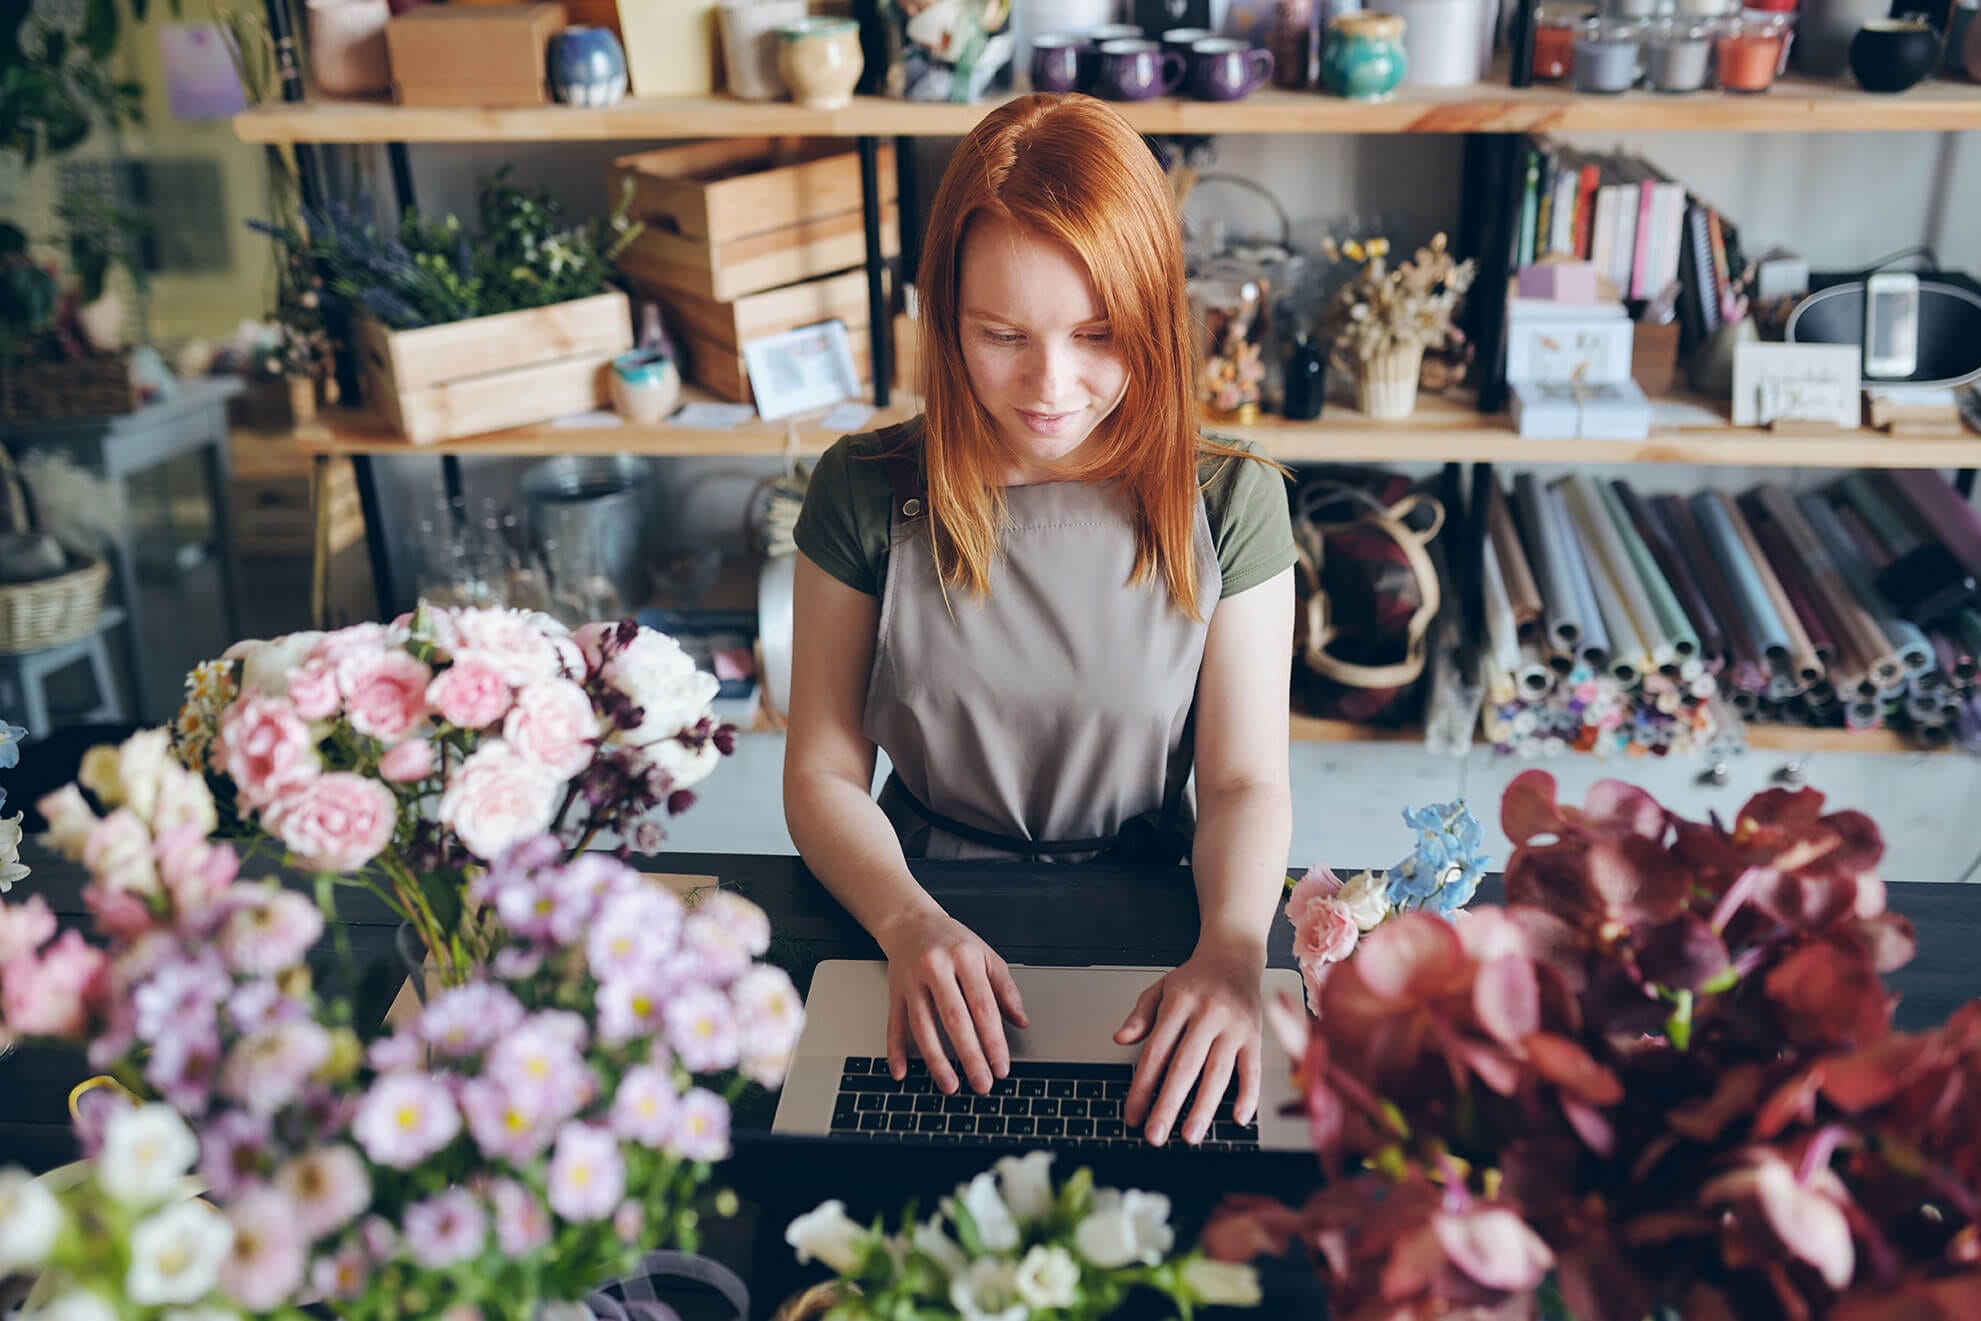 Content redhead florist in apron standing at counter with flowers and working with social media of flower shop | Social Media Audit